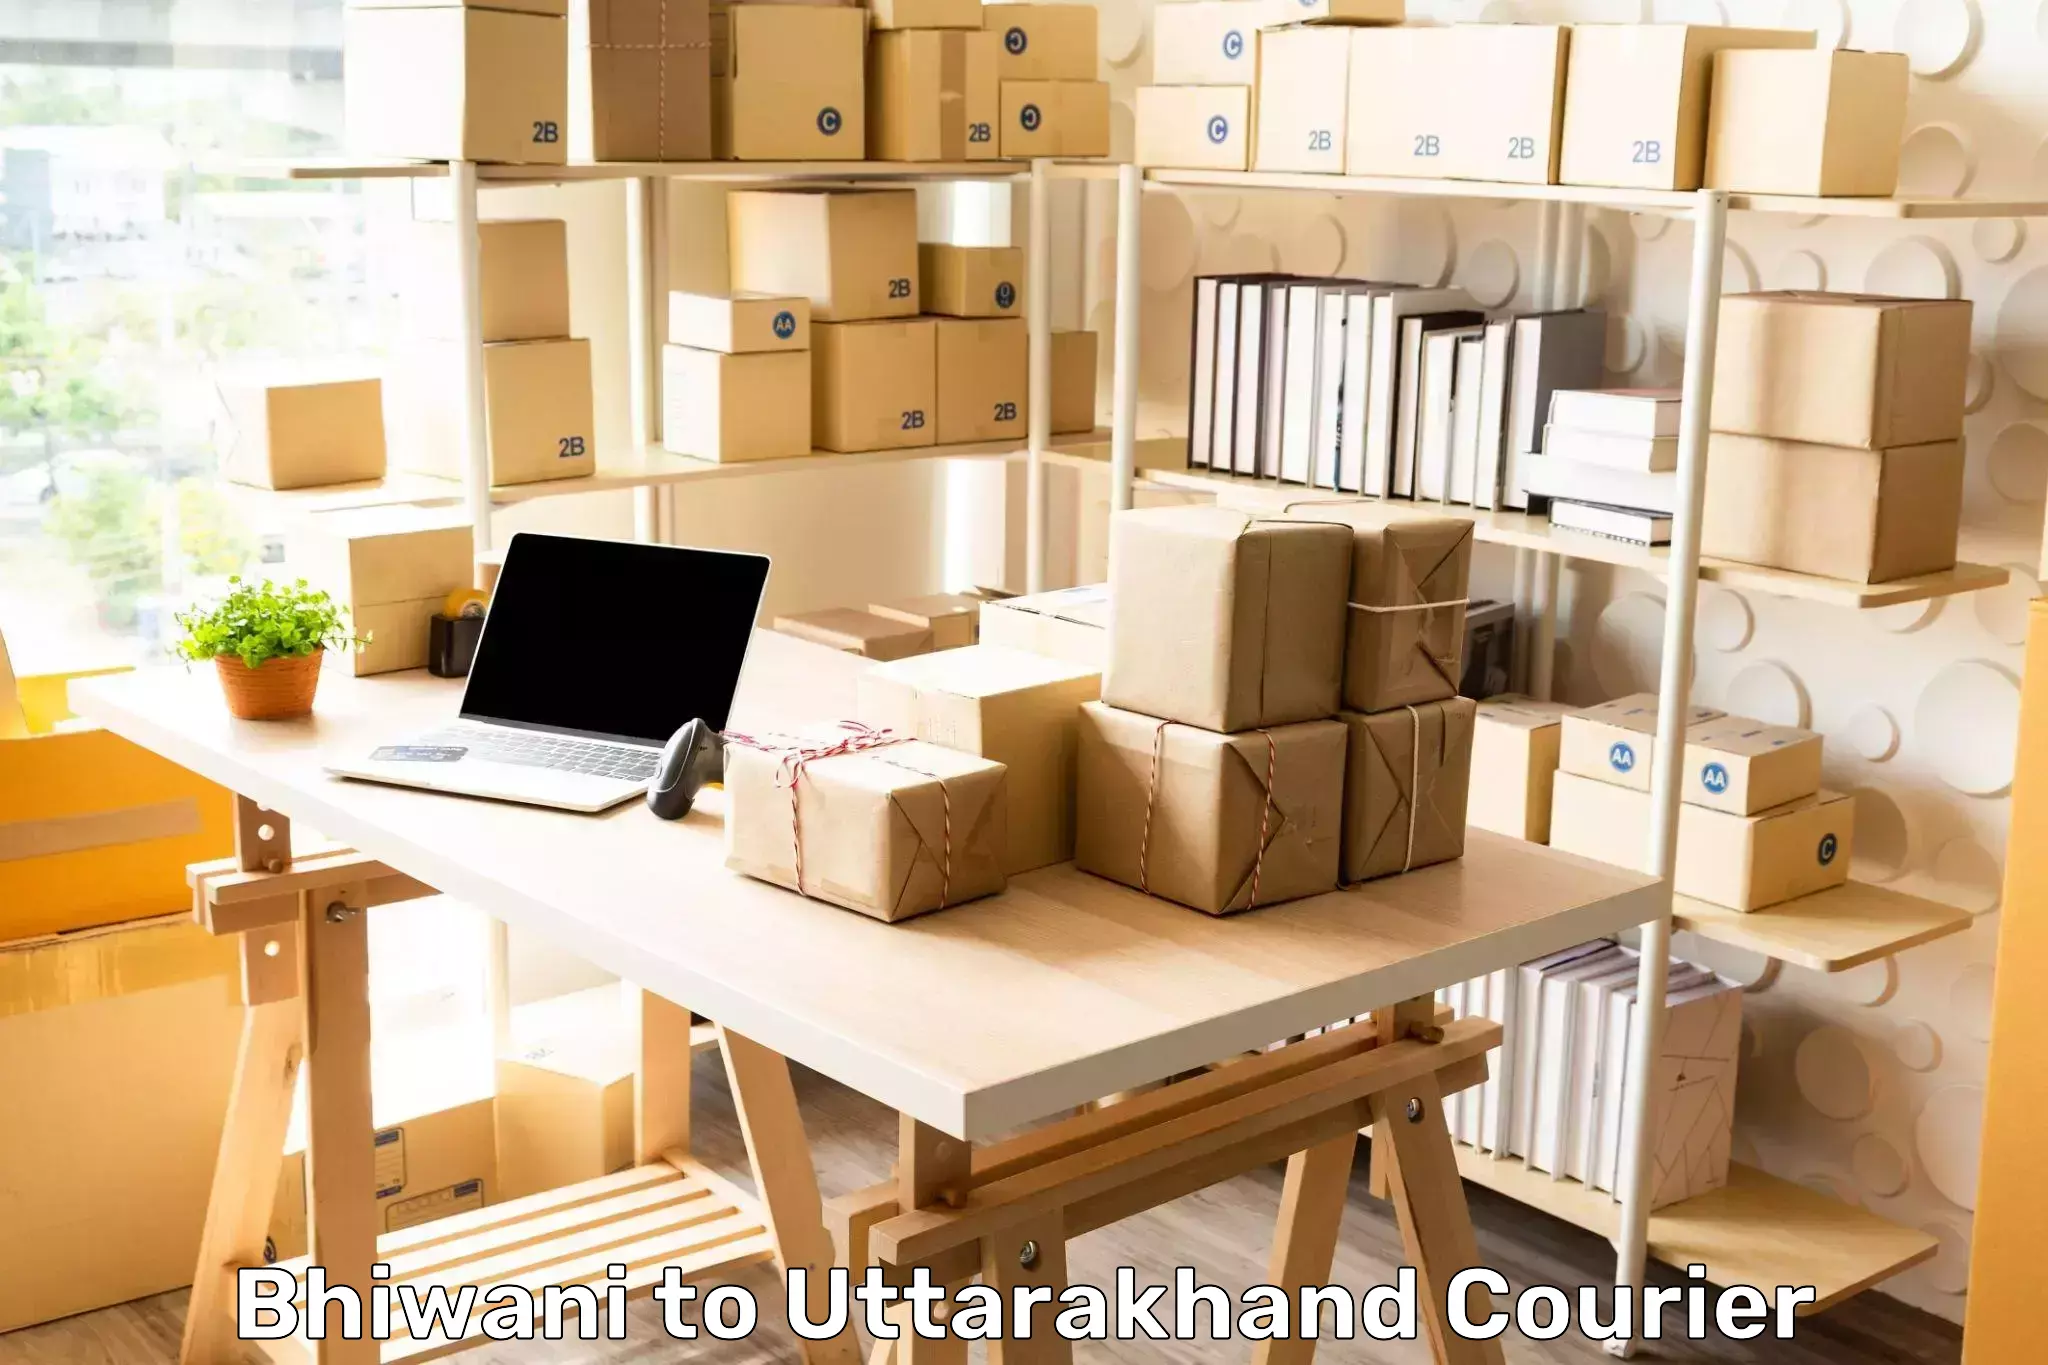 State-of-the-art courier technology Bhiwani to Rishikesh